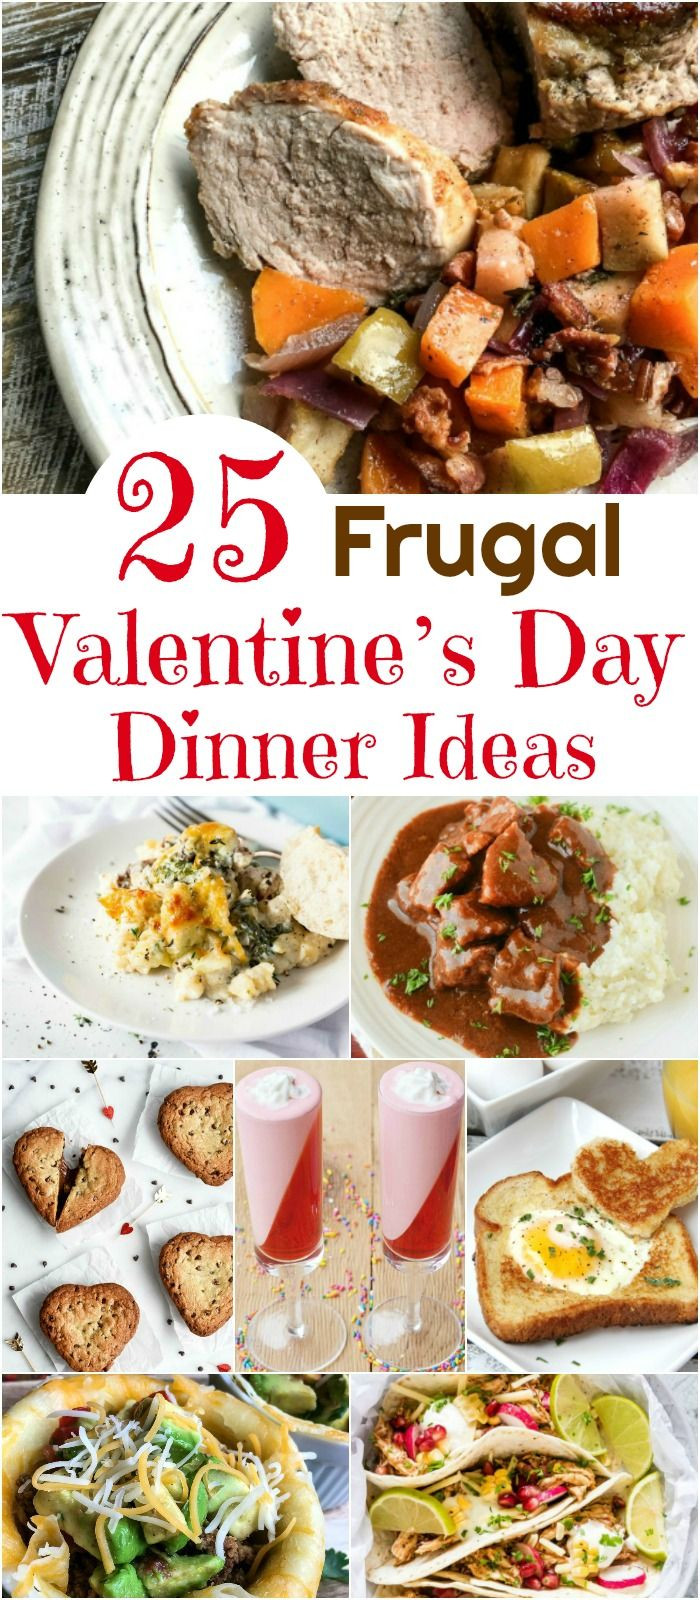 Cheap Romantic Dinner Ideas
 25 Frugal Valentine s Day Dinner Ideas Your Sweetie Will